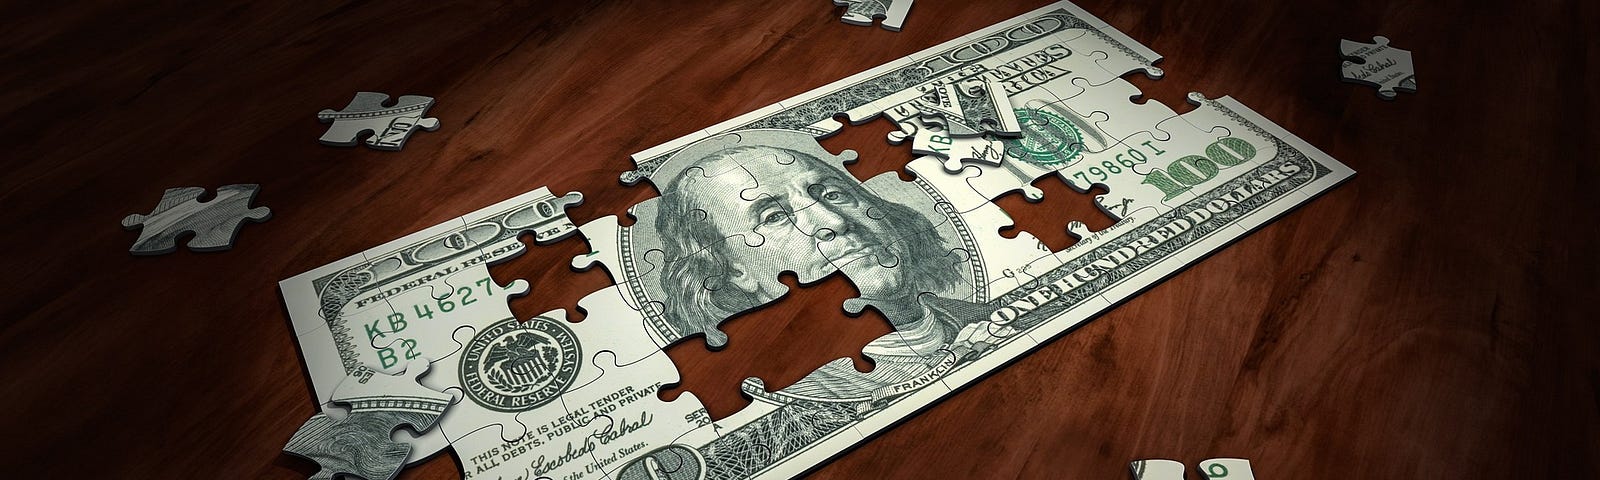 The image shows a 100 dollar bill jigsaw puzzle